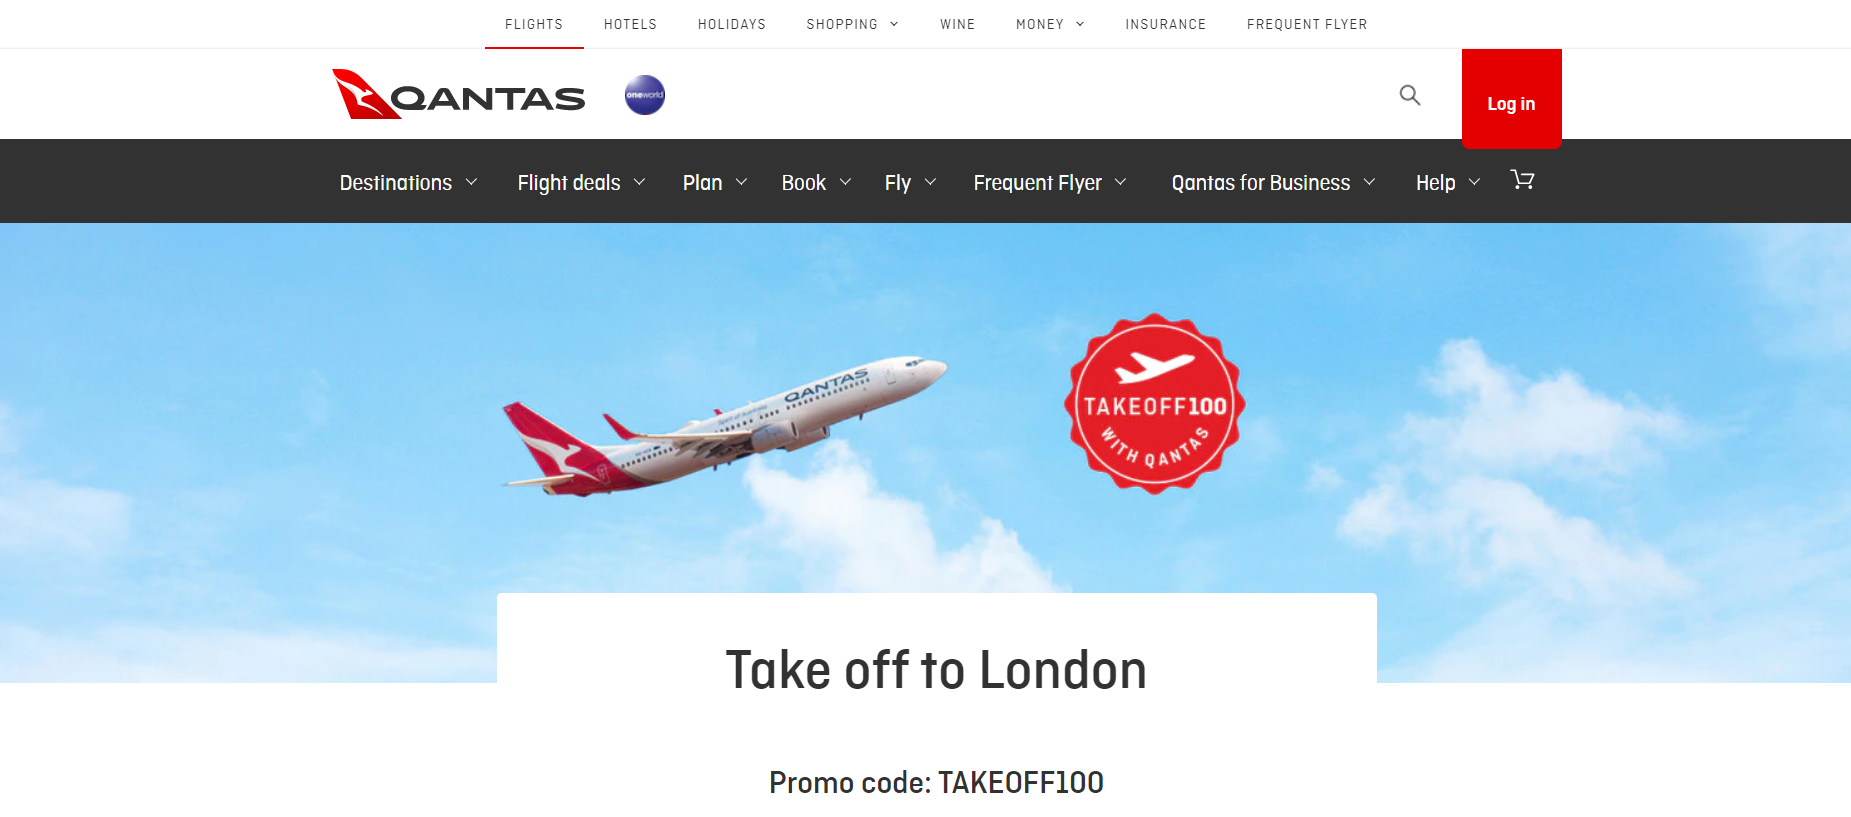 Qantas extra $100 OFF on eligible fares to London flights from anywhere in Australia with promo code